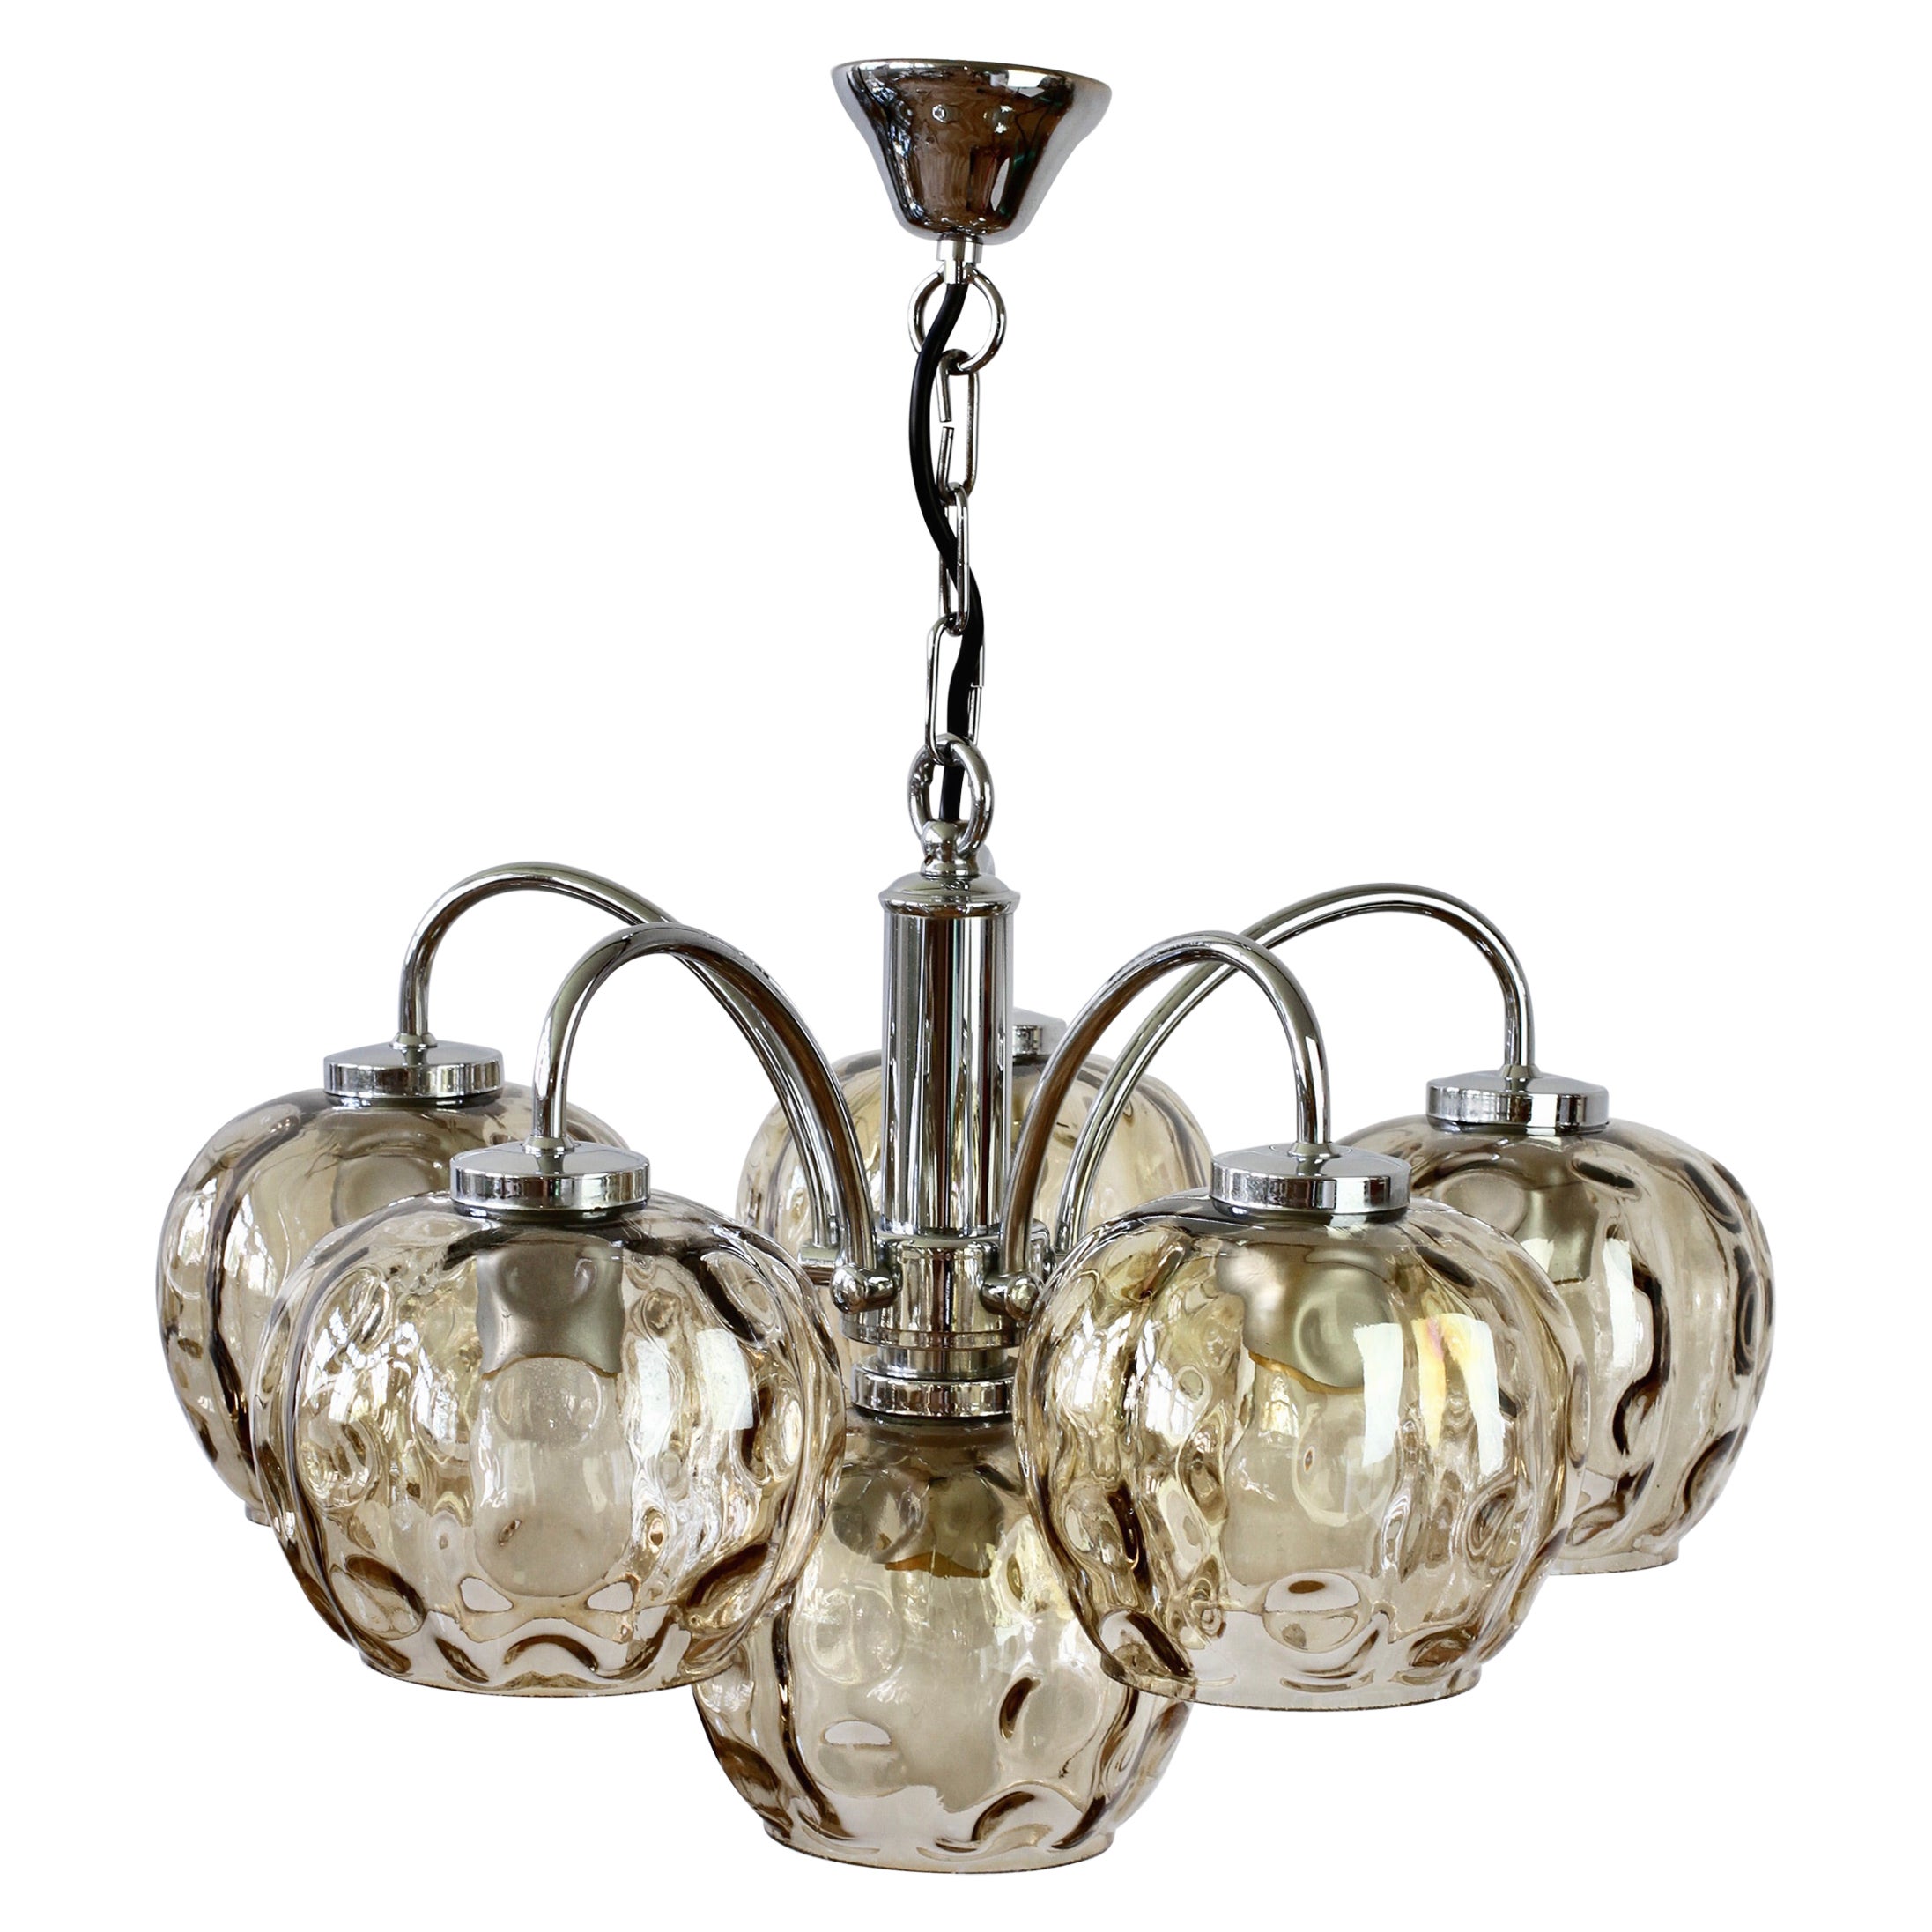 1970s Vintage Six Arm Chrome Chandelier with Smoked Toned "Bubble" Glass Shades For Sale